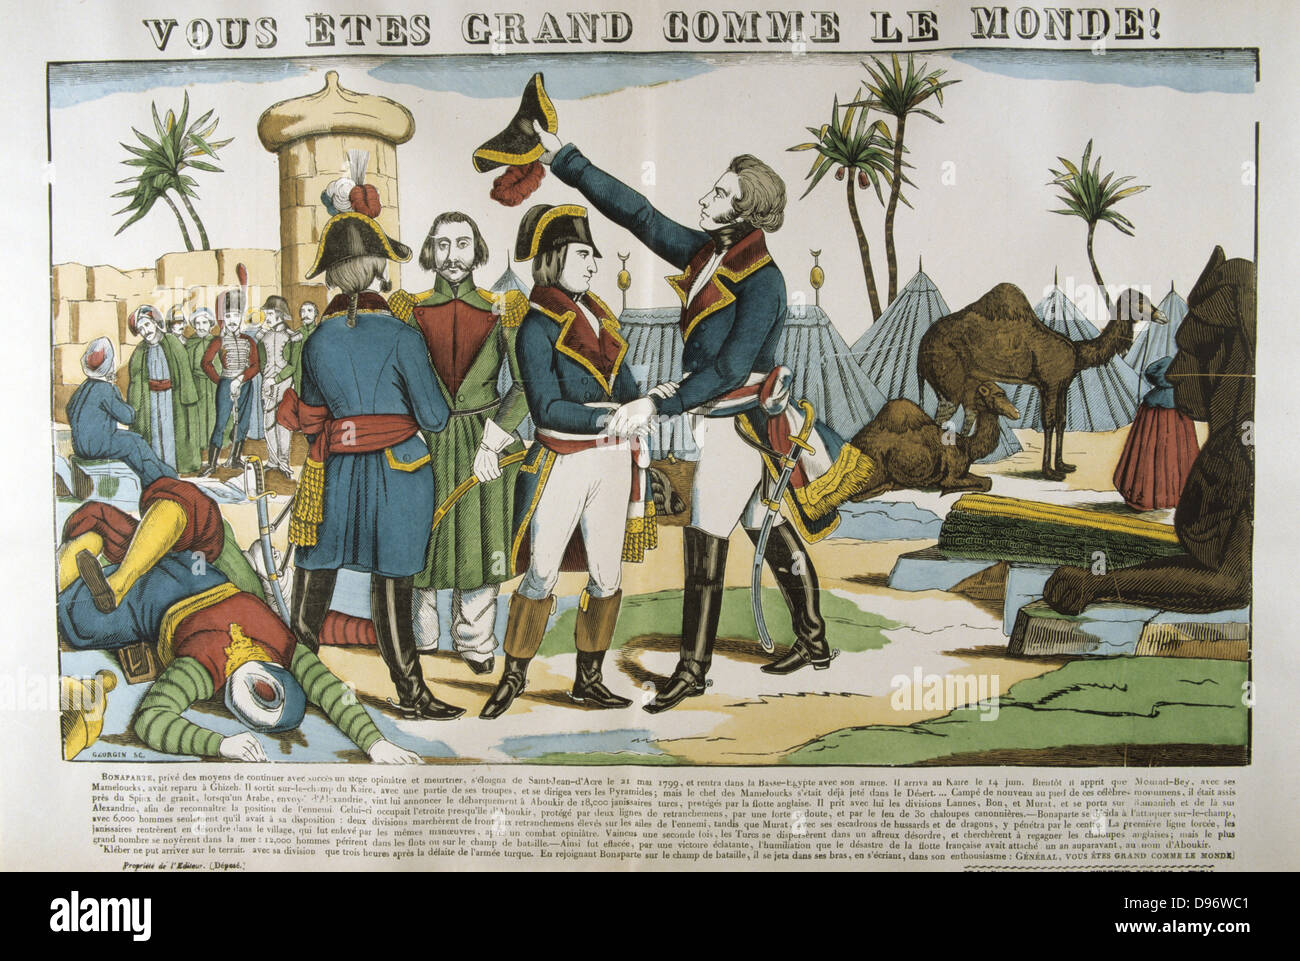 Battle of the Pyramids also called Battle of Embabeh, 21 July 1798. French army in Egypt under Napoleon victorious against the Mamluks. Napoleon and General Kleber congratulating each other after their victory. Popular French hand-coloured woodcut. Stock Photo